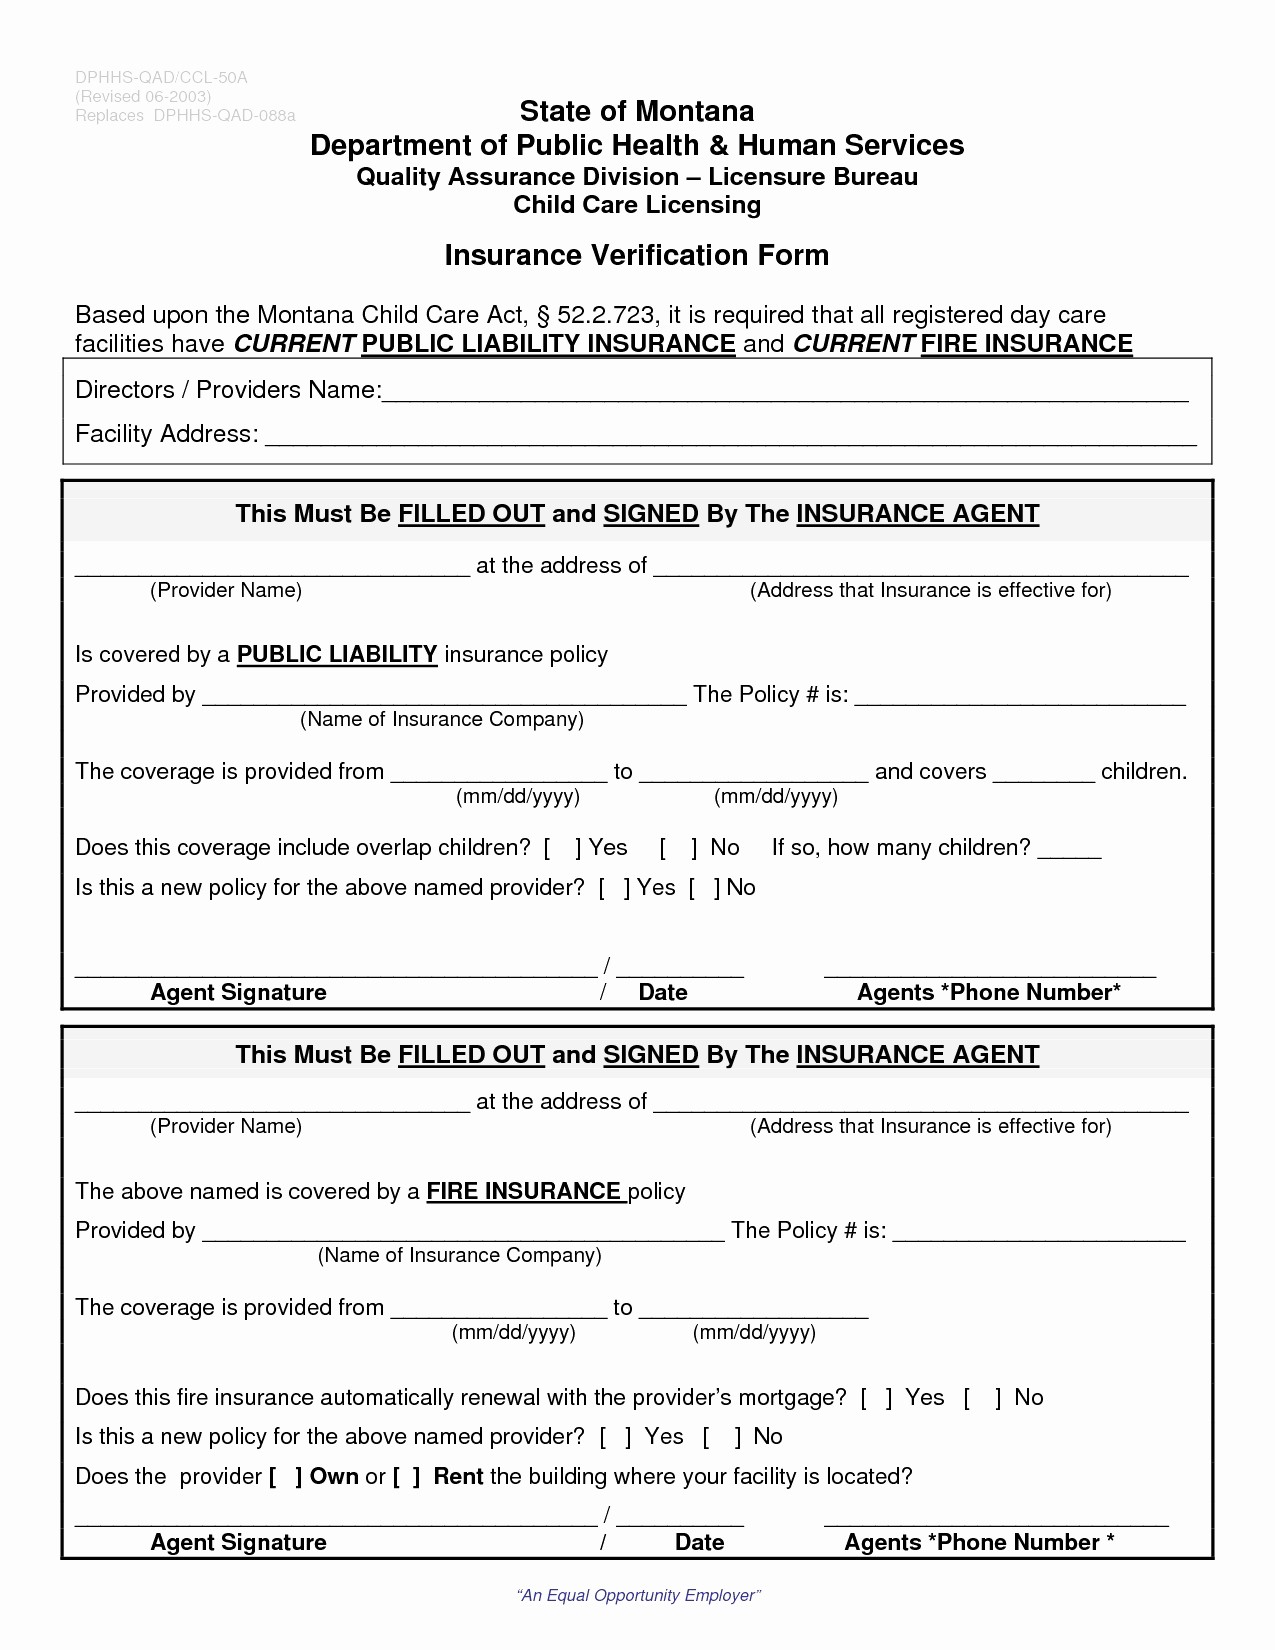 Auto Insurance Verification Form Template 8 Reasons Why Document